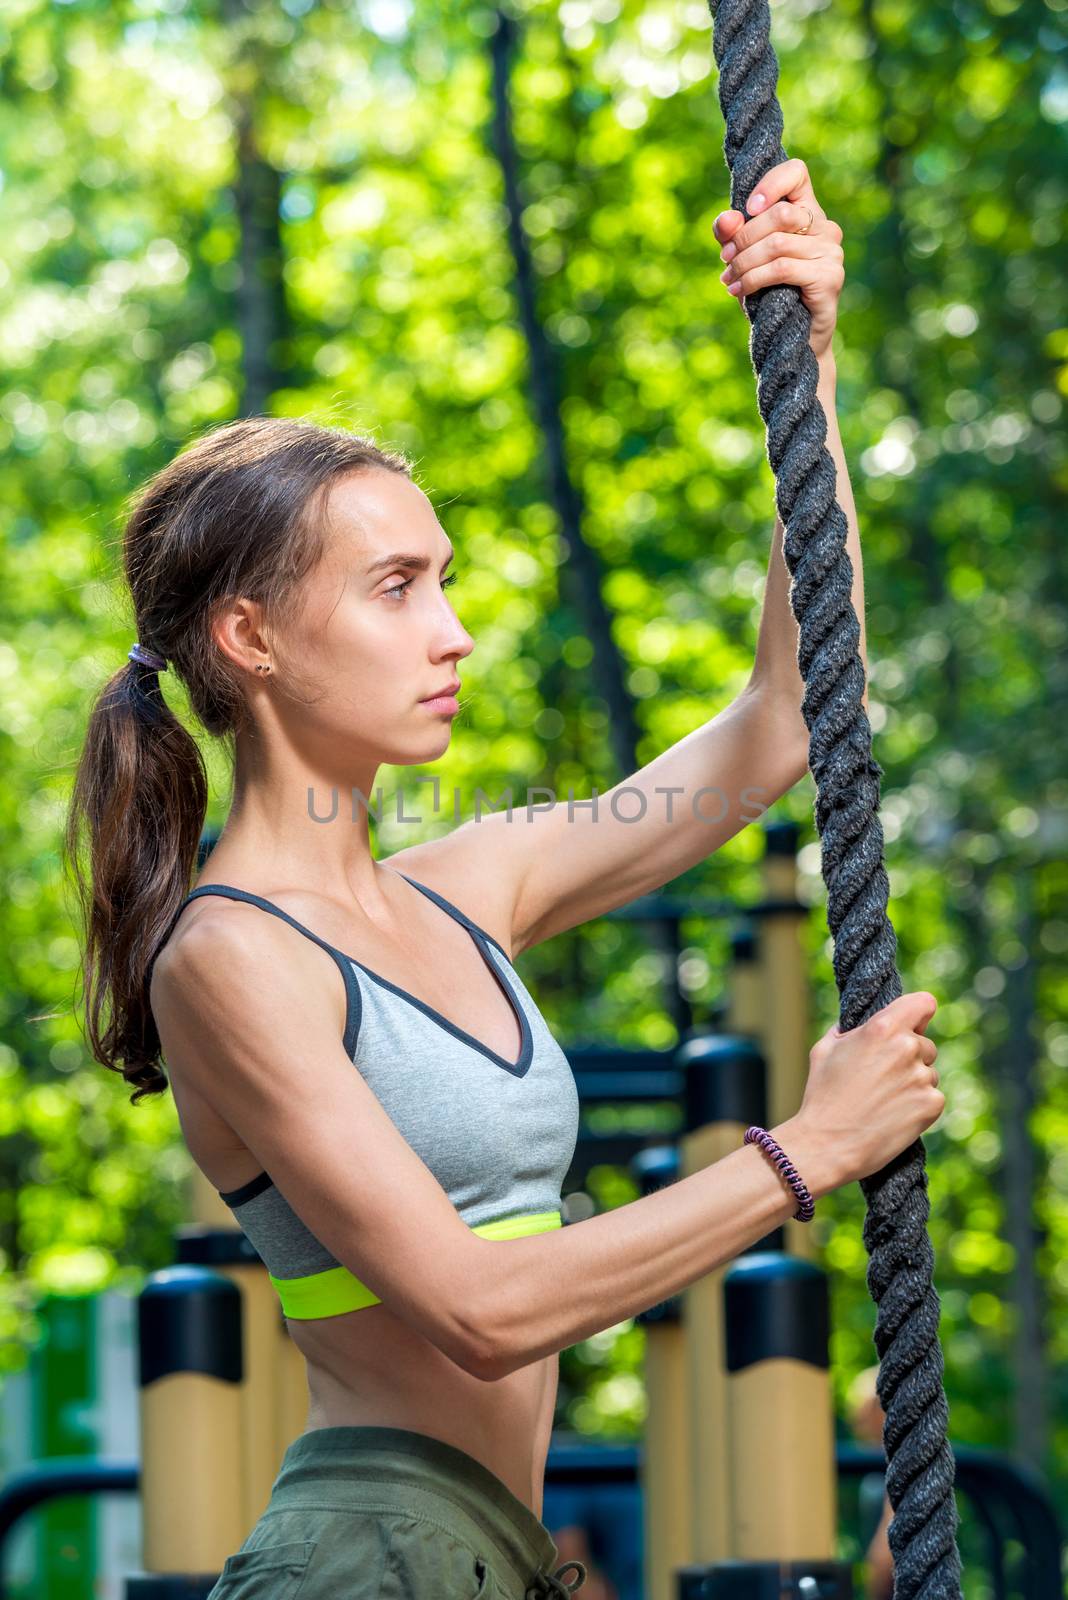 portrait of a woman with a rope on the playground, shooting during training